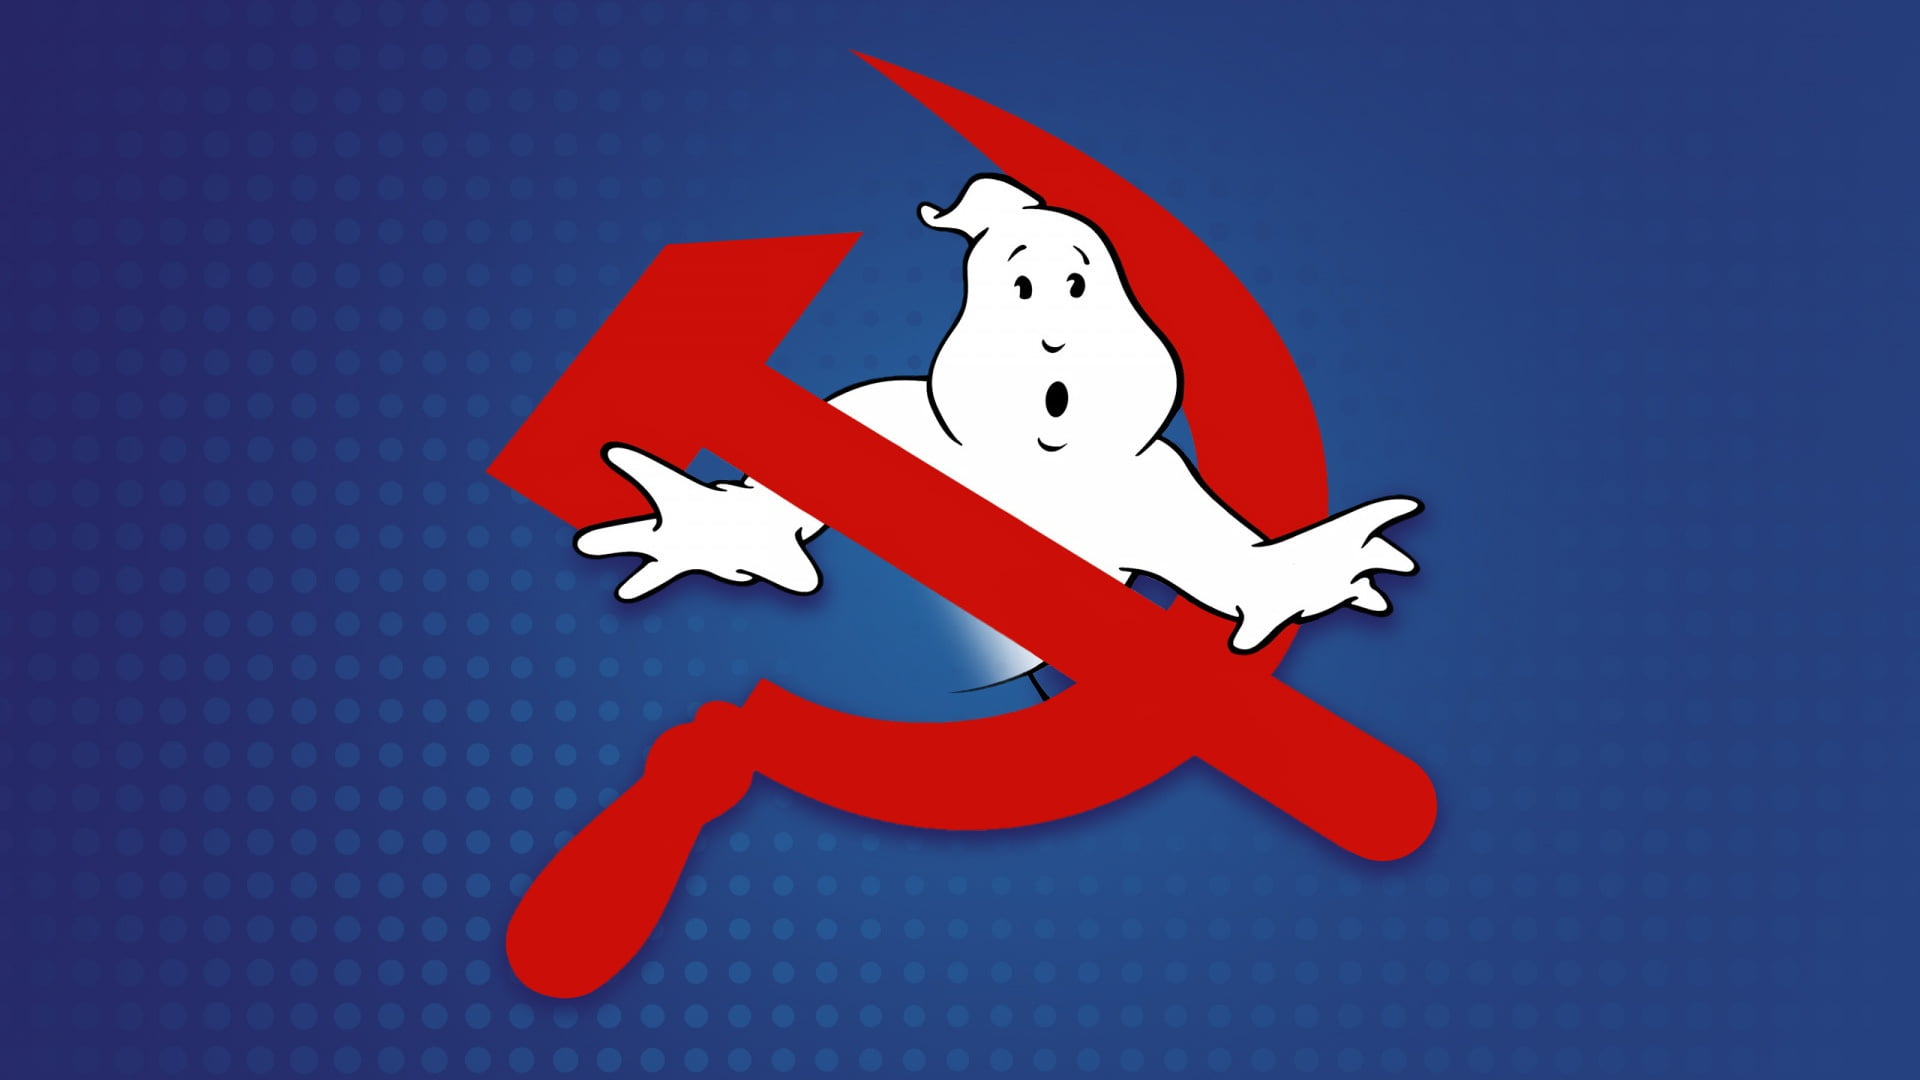 Minimalism, Ghost hunters, Joke, The hammer and sickle, The Specter Of Communism